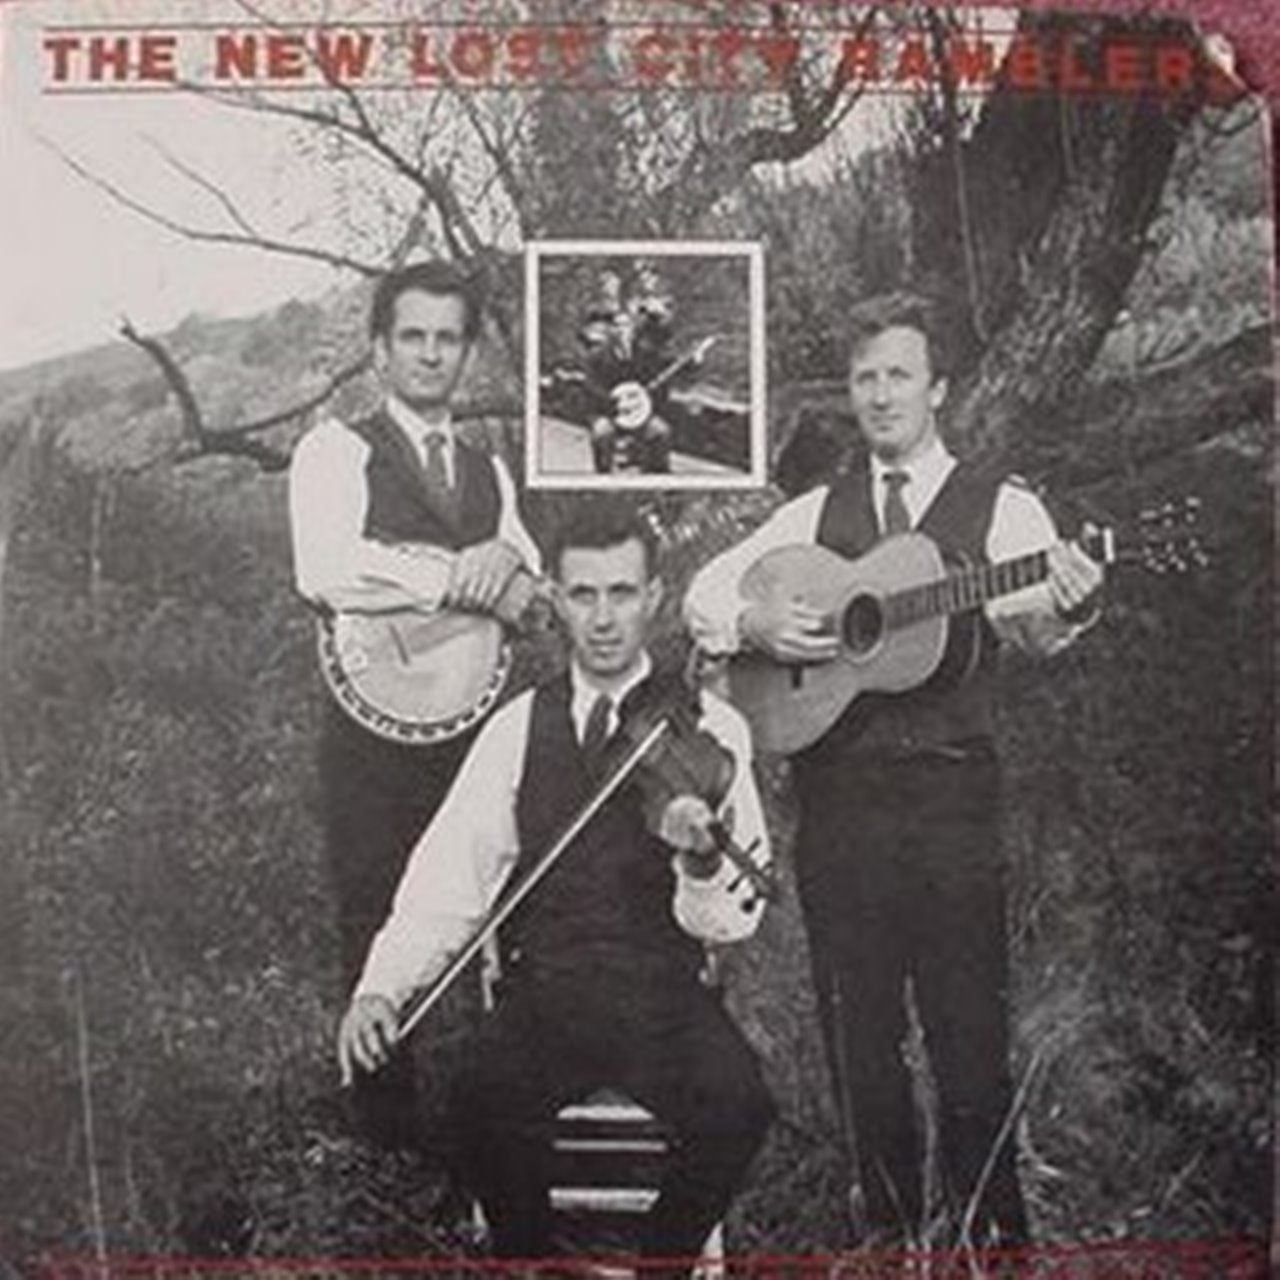 New Lost City Ramblers – 20 Years Of Concert Performances cover album